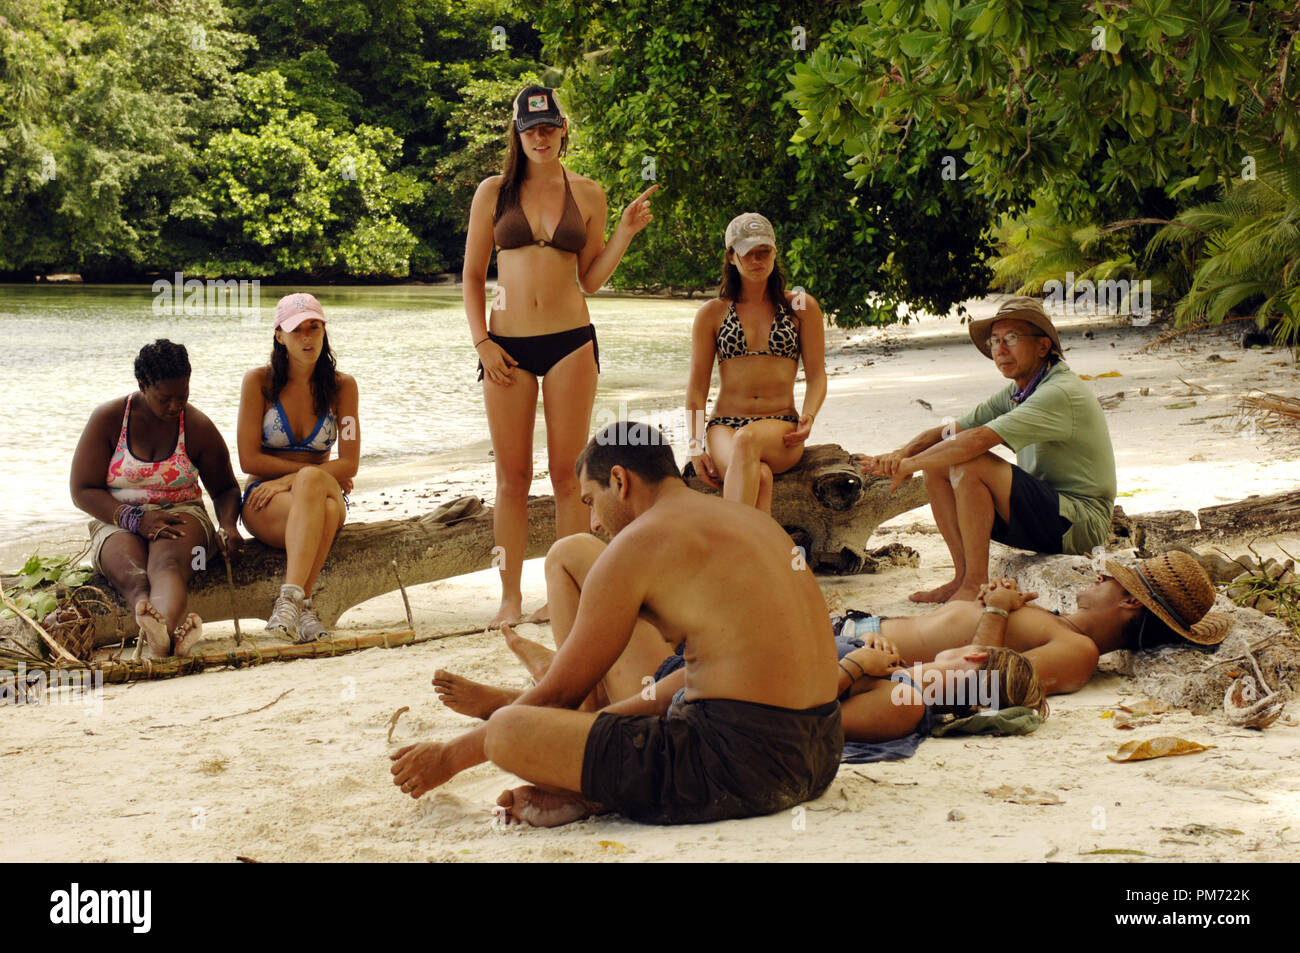 Film Still from 'Survivor: Micronesia - Fans vs. Favorites' Cirie Fields, Eliza Orlins, Amanda Kimmel, Jonathan Penner, Parvati Shallow, Ami Cusack, Oscar Lusth, Yau-Man Chan 2008 Photo Credit: Jeffrey R. Staab   File Reference # 30755341THA  For Editorial Use Only -  All Rights Reserved Stock Photo